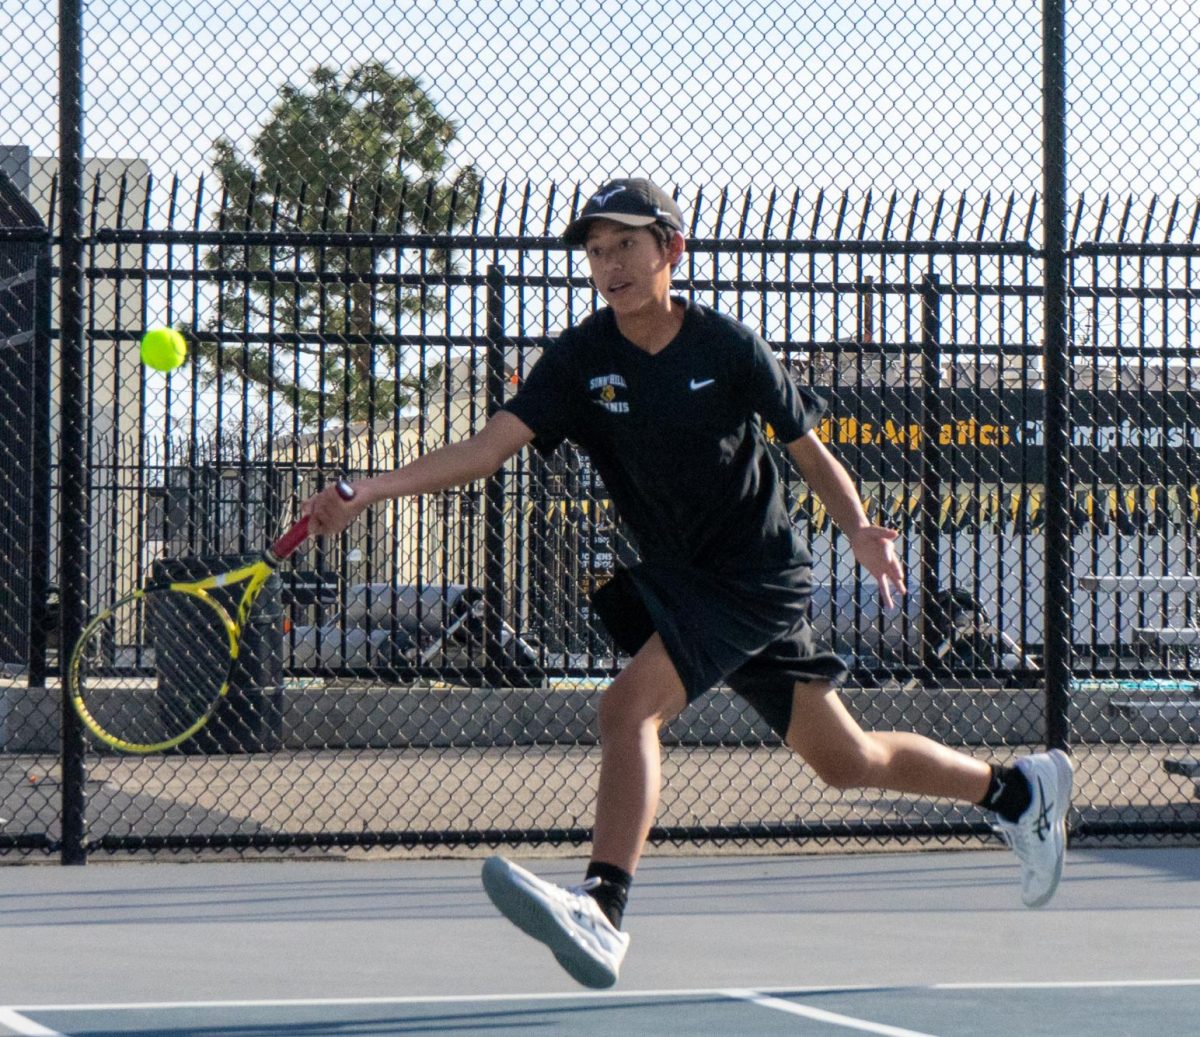 Freshman+Dom+Tenazas+competes+in+a+singles+3+during+a+home+match+against+Bolsa+Grande+High+School+on+Tuesday%2C+March+5.+Tenazas+won+6-8%2C+helping+the+Lancers+to+a+14-4+victory.+